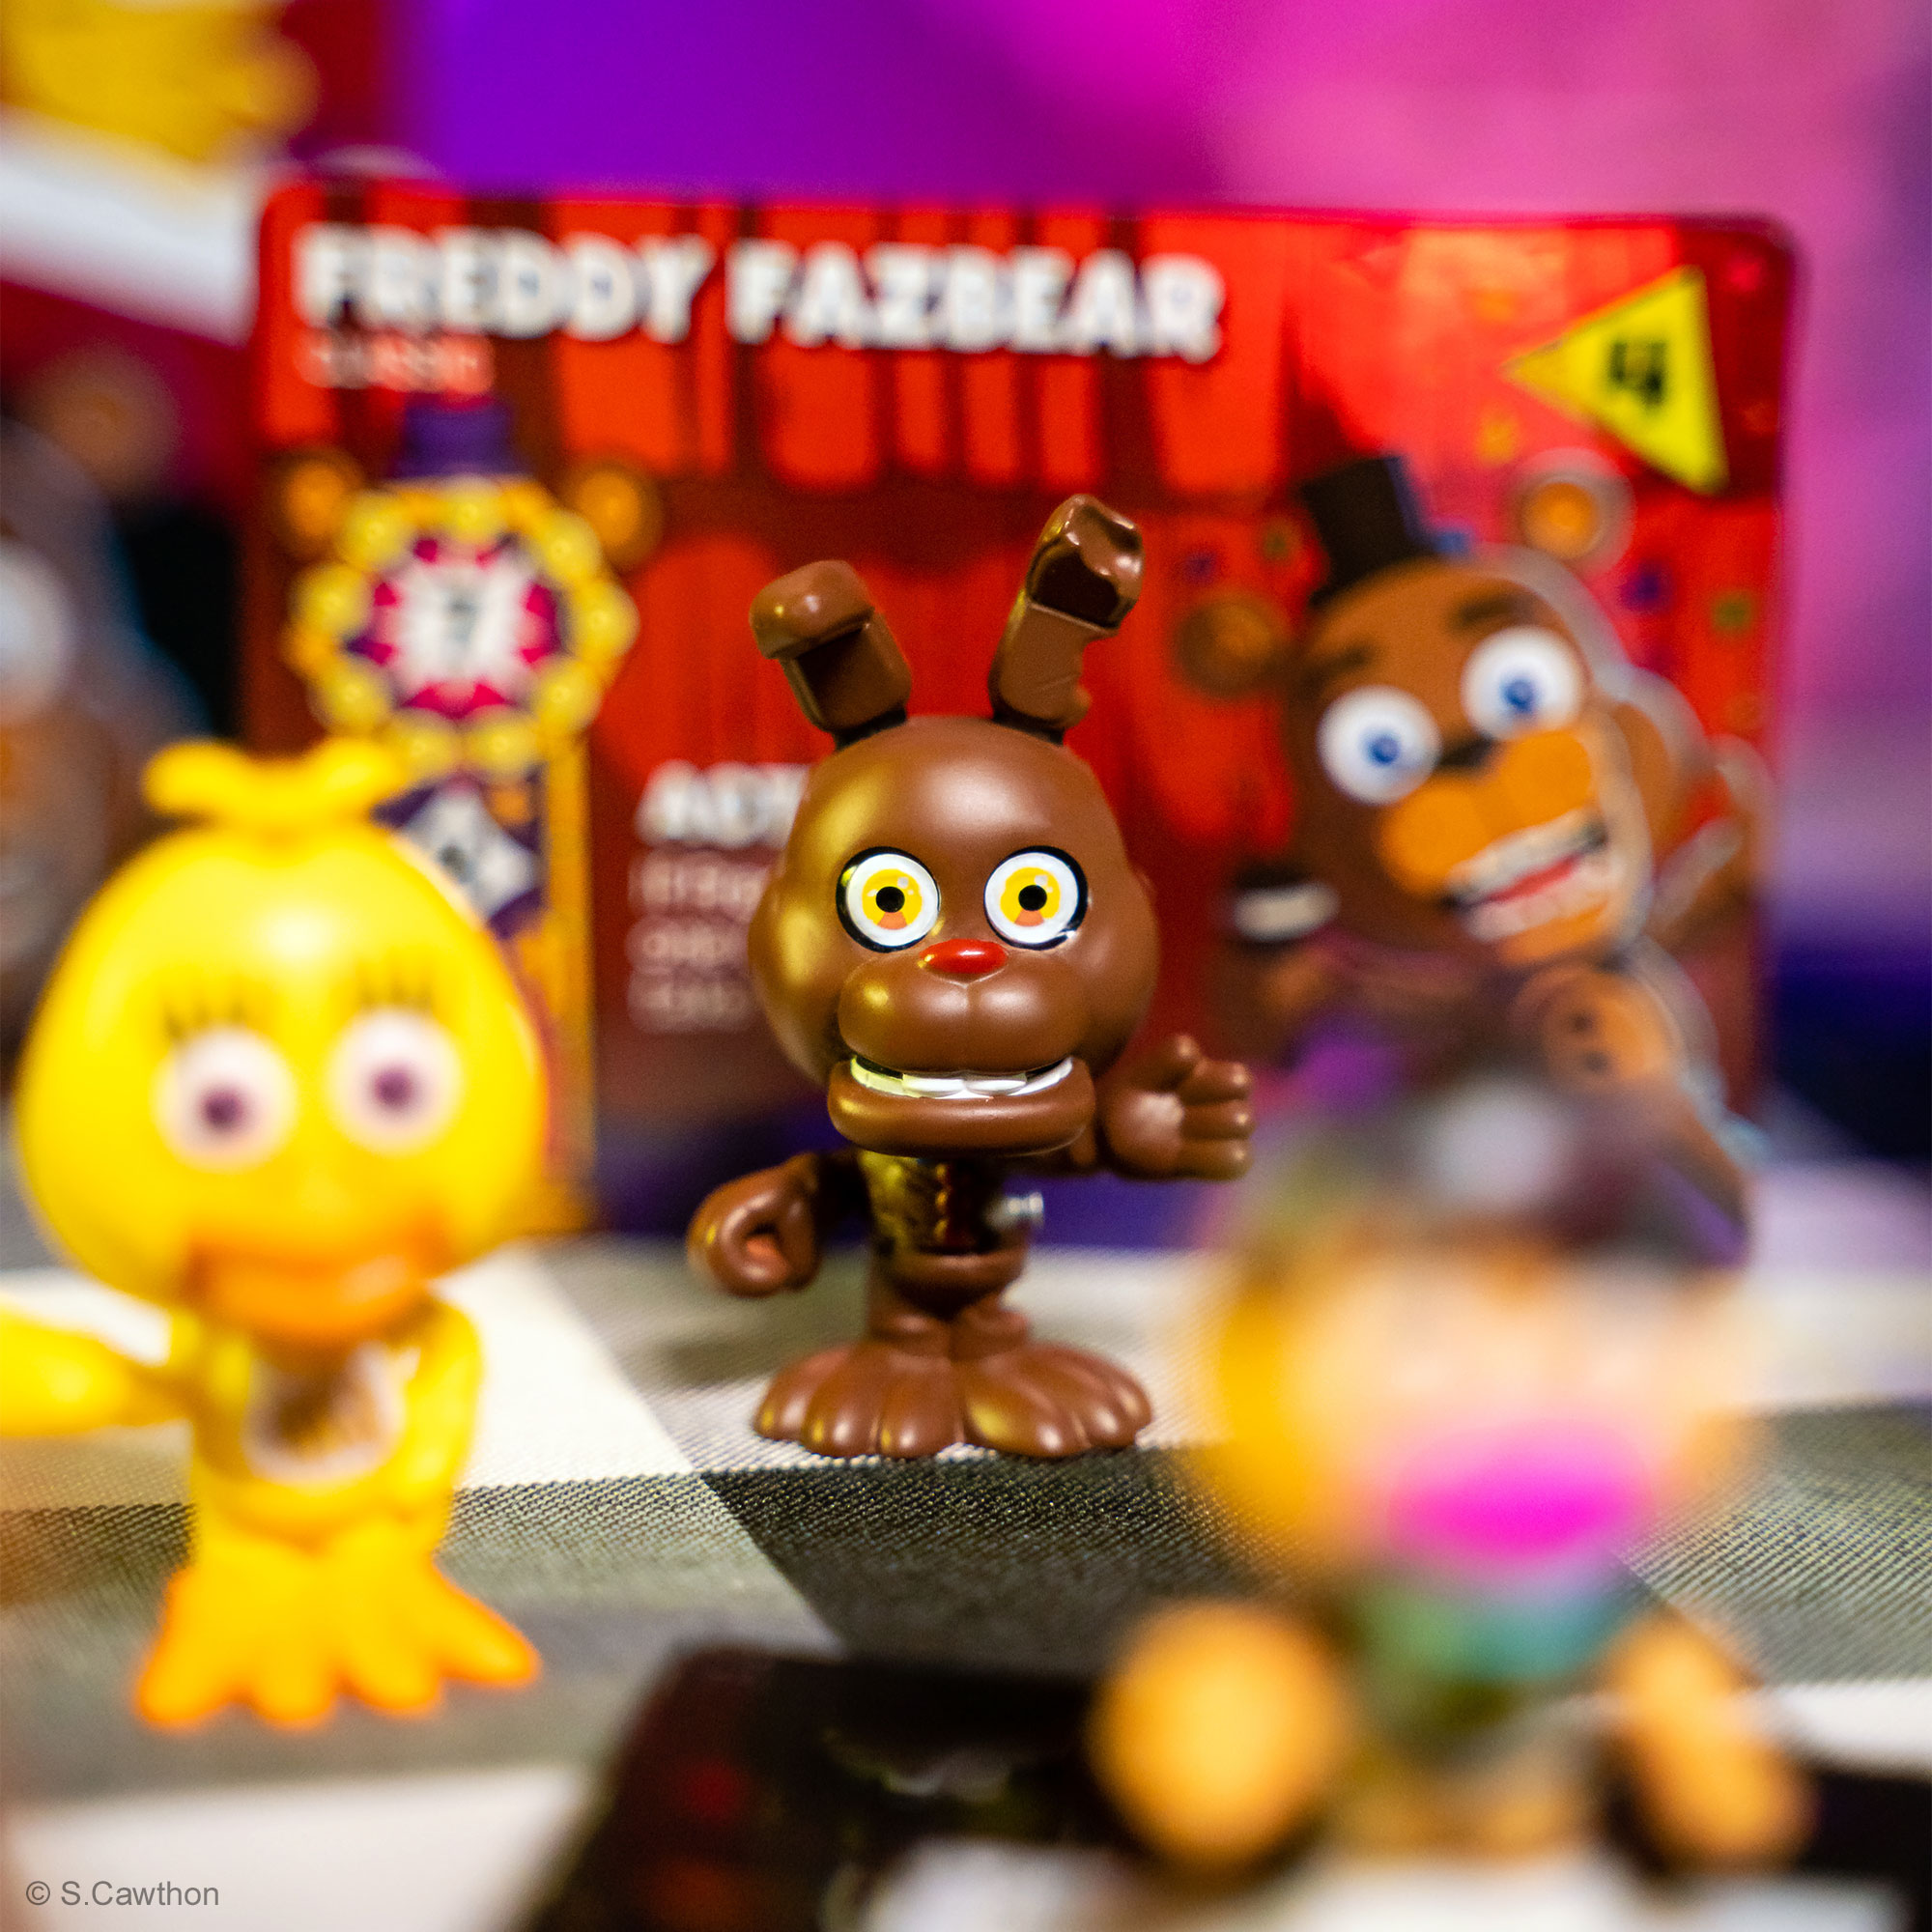 Funko Games Five Nights at Freddy's FightLine Collectible Battle Game  Character Pack (Styles May Vary)